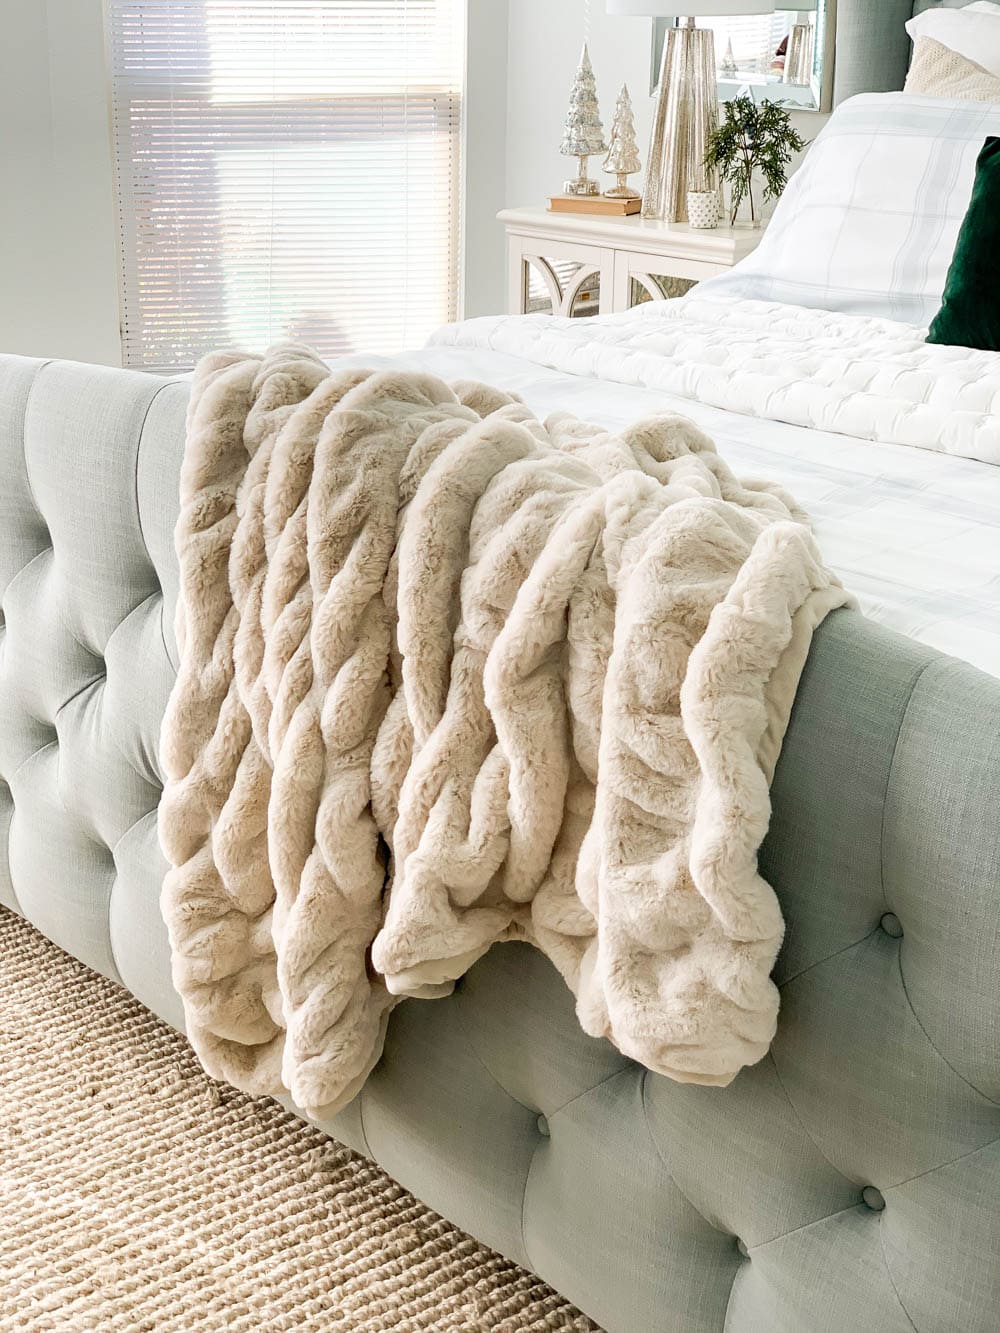 Add cozy warm fur blankets to your bedroom for the holiday season. #ABlissfulNest #christmasbedroom #bedroomdecor